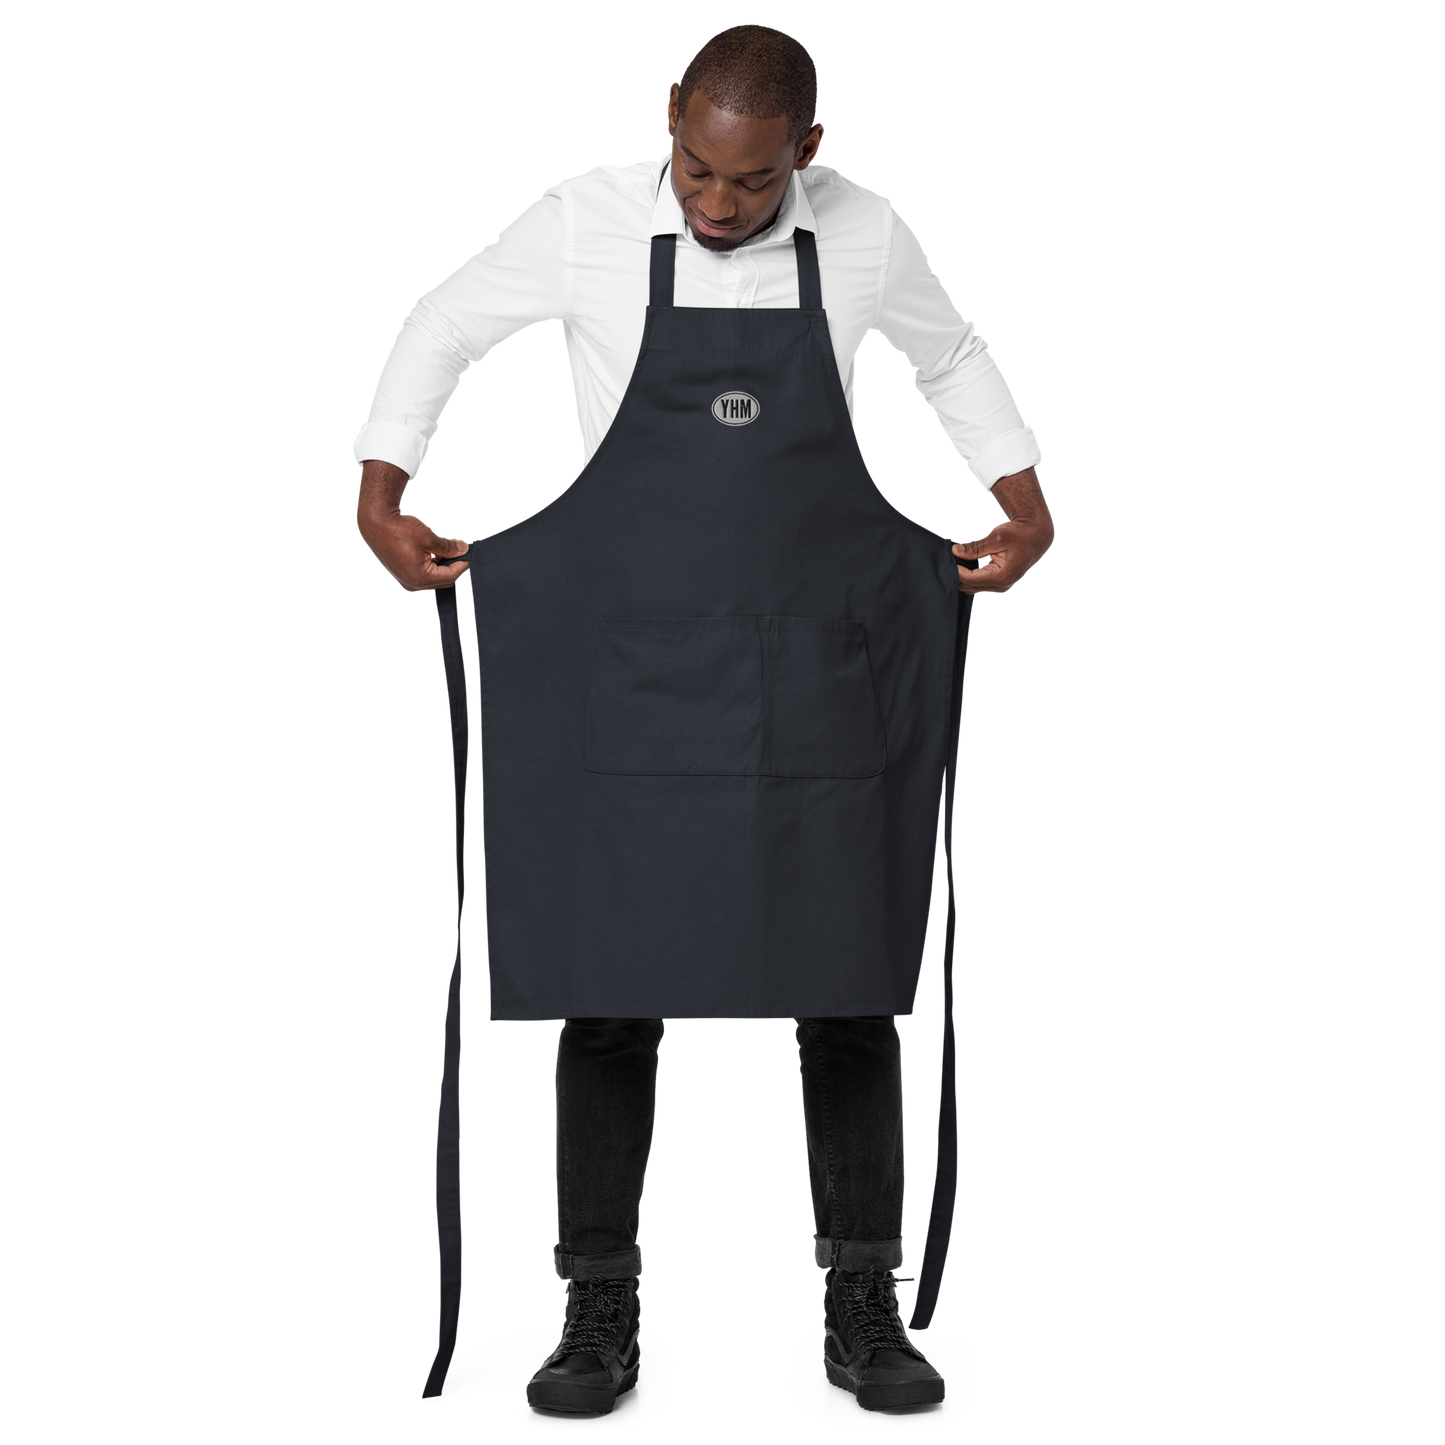 Oval Car Sticker Organic Cotton Apron • Black and White Embroidery